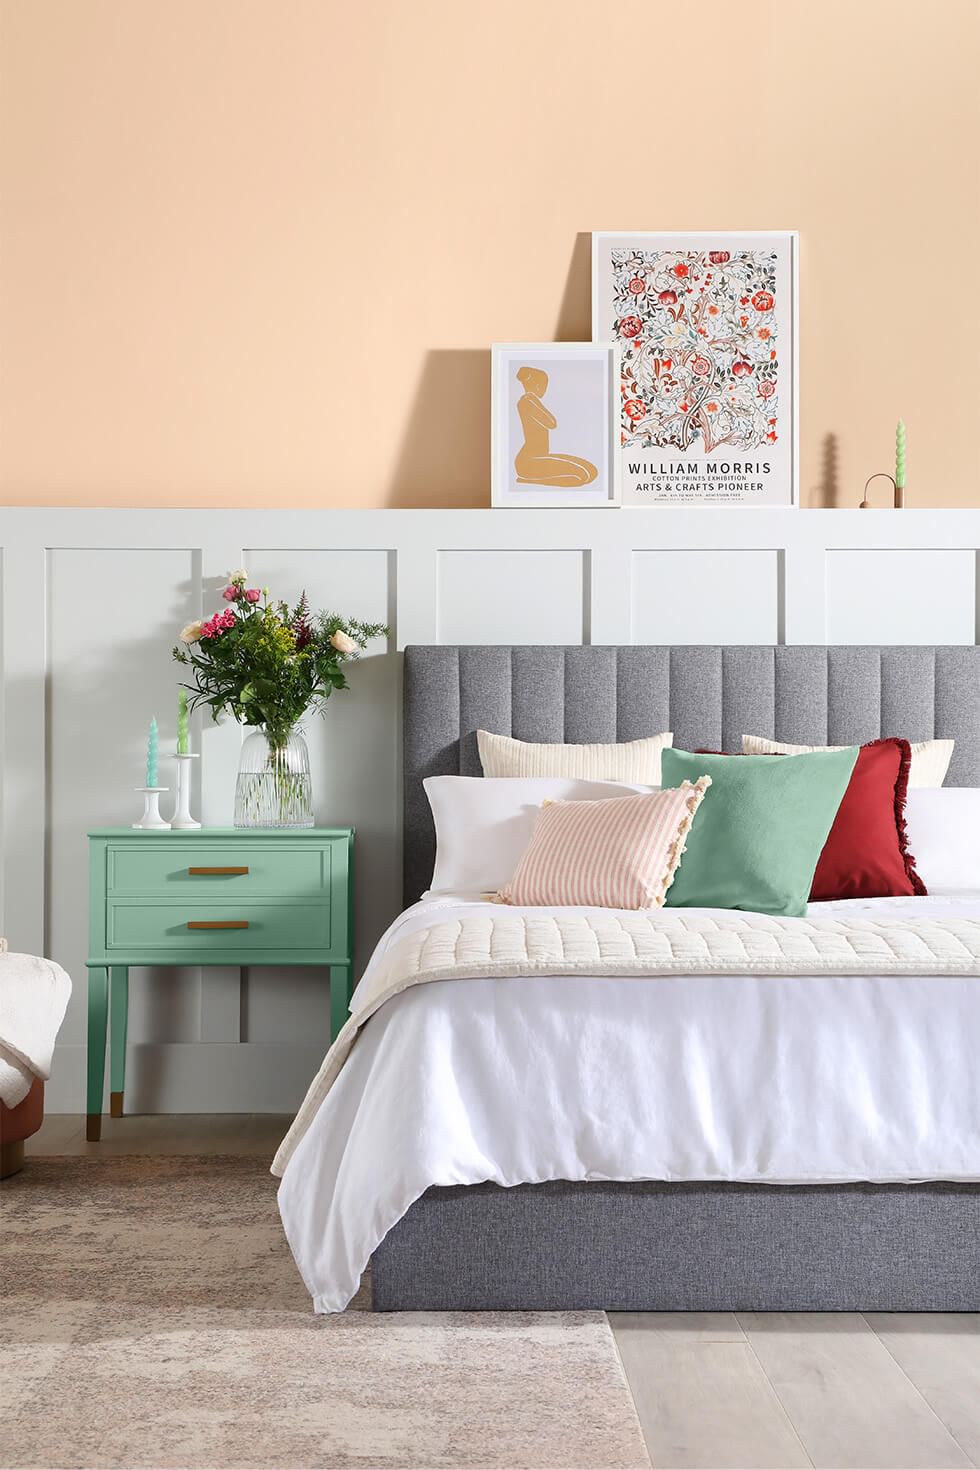 A bedroom with a two-tone peach and white wall, jade green side table and stylish grey fabric bed